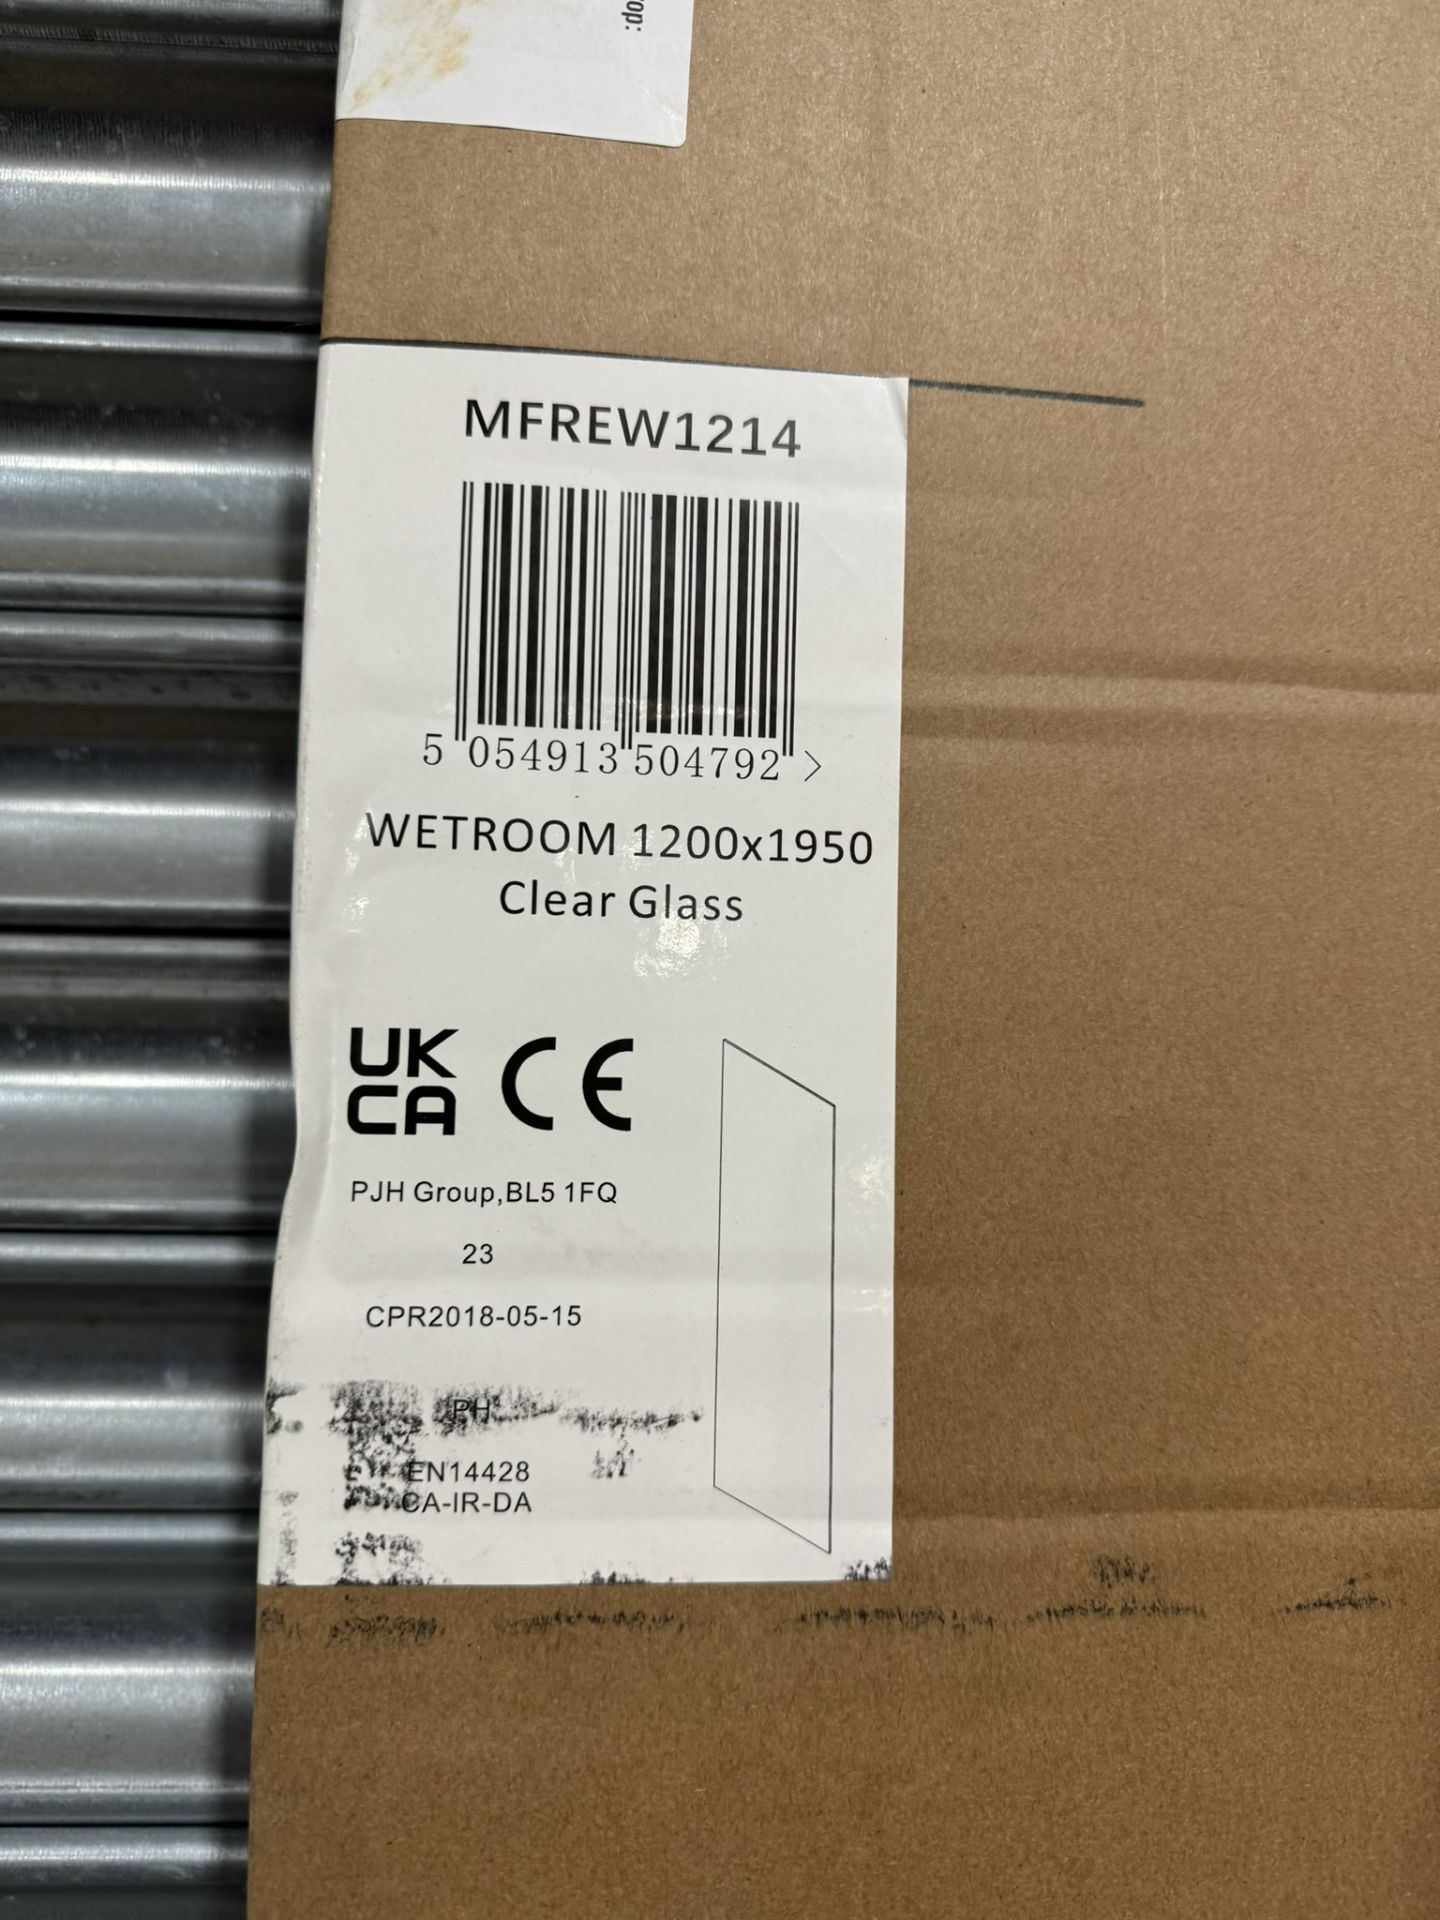 Unbranded MFREW1214 Wetroom Clear Glass Panel, 1200 x 1950 - Image 2 of 2